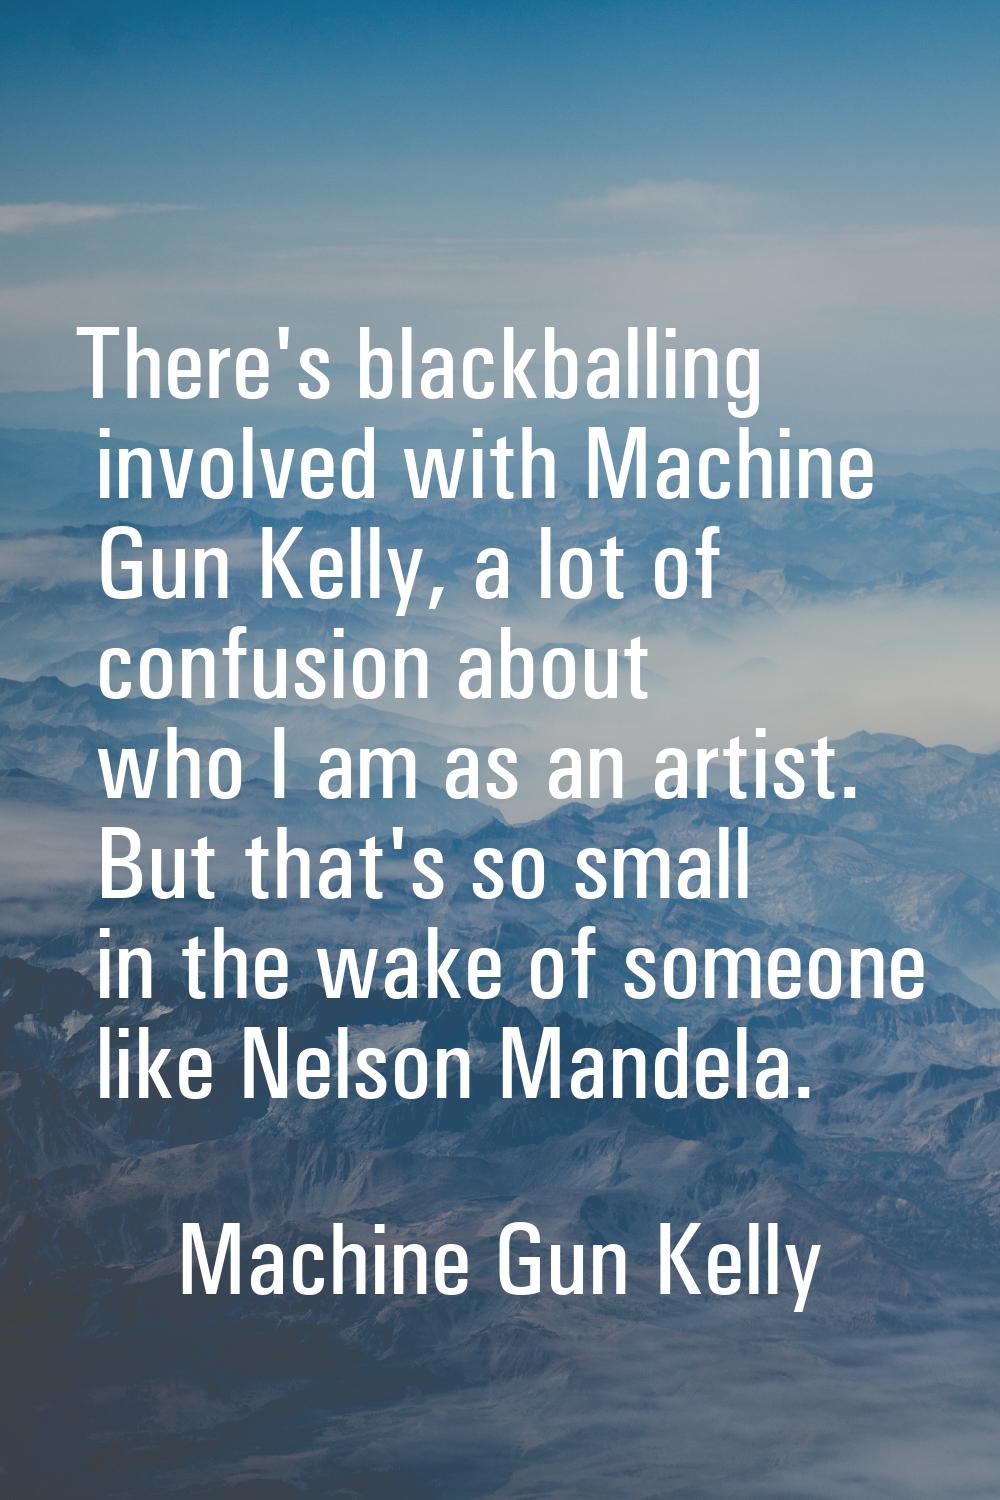 There's blackballing involved with Machine Gun Kelly, a lot of confusion about who I am as an artis